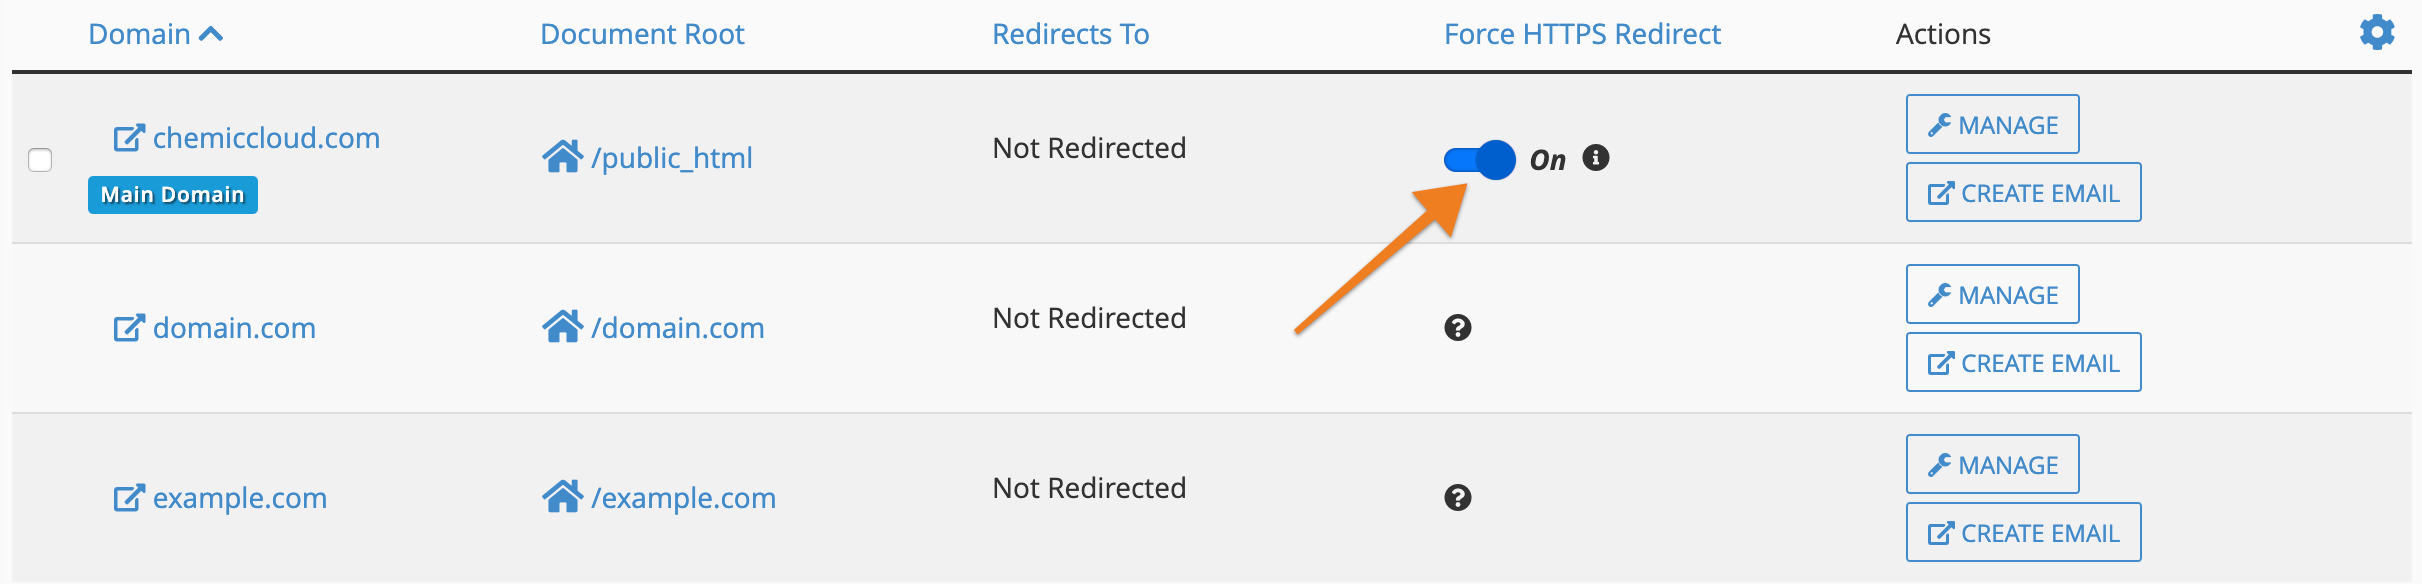 Force HTTPS Redirect > Toggle On